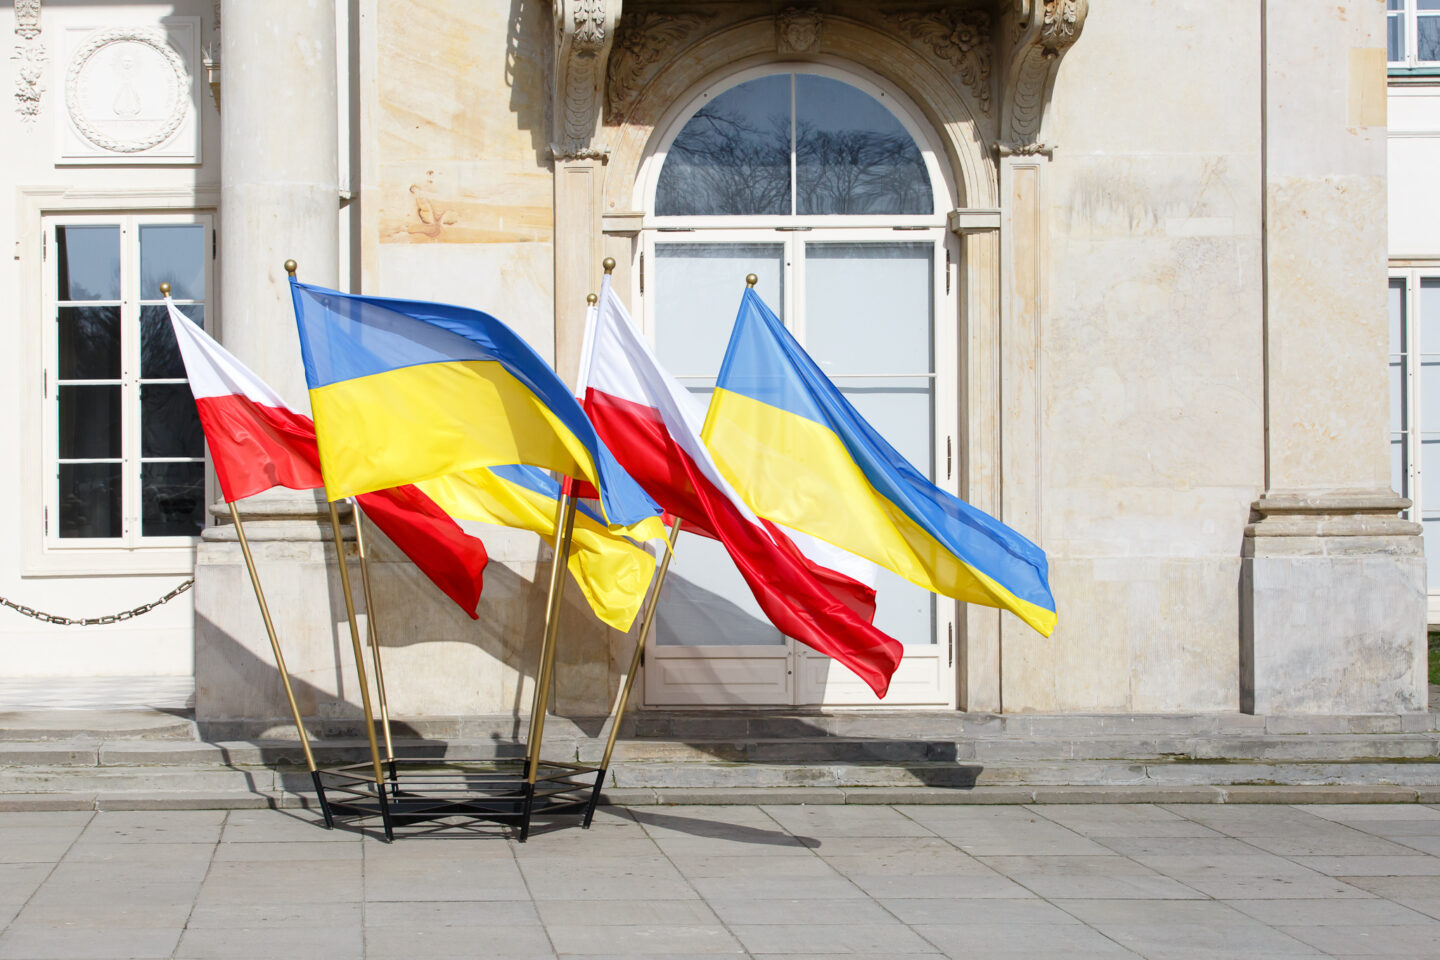 Day-to-day cooperation instead of grand alliances. Accepting mediocrity in Polish-Ukrainian relations